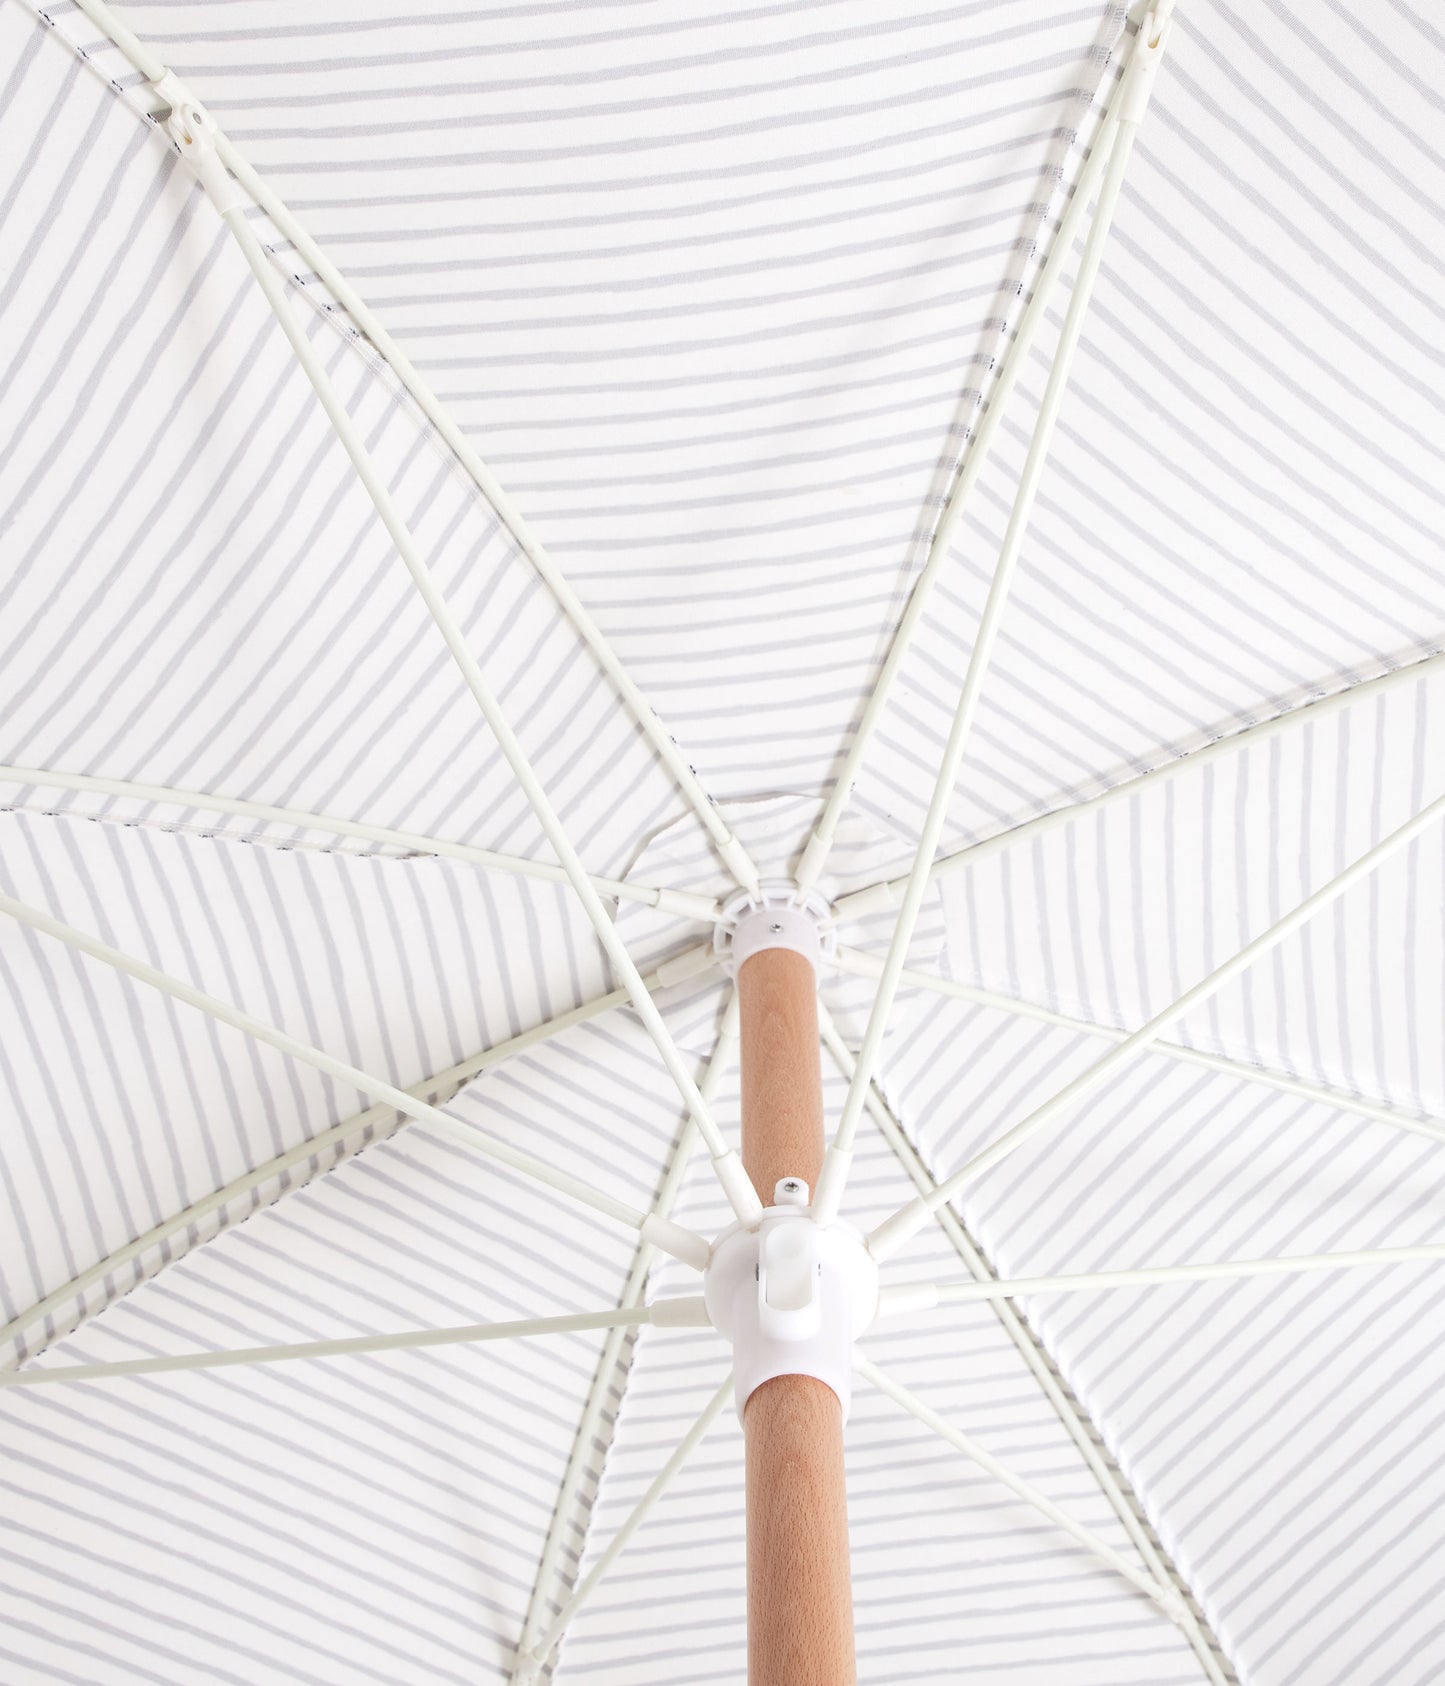 Sunday Supply Co Natural Instinct beach umbrella open and seen from underneath.